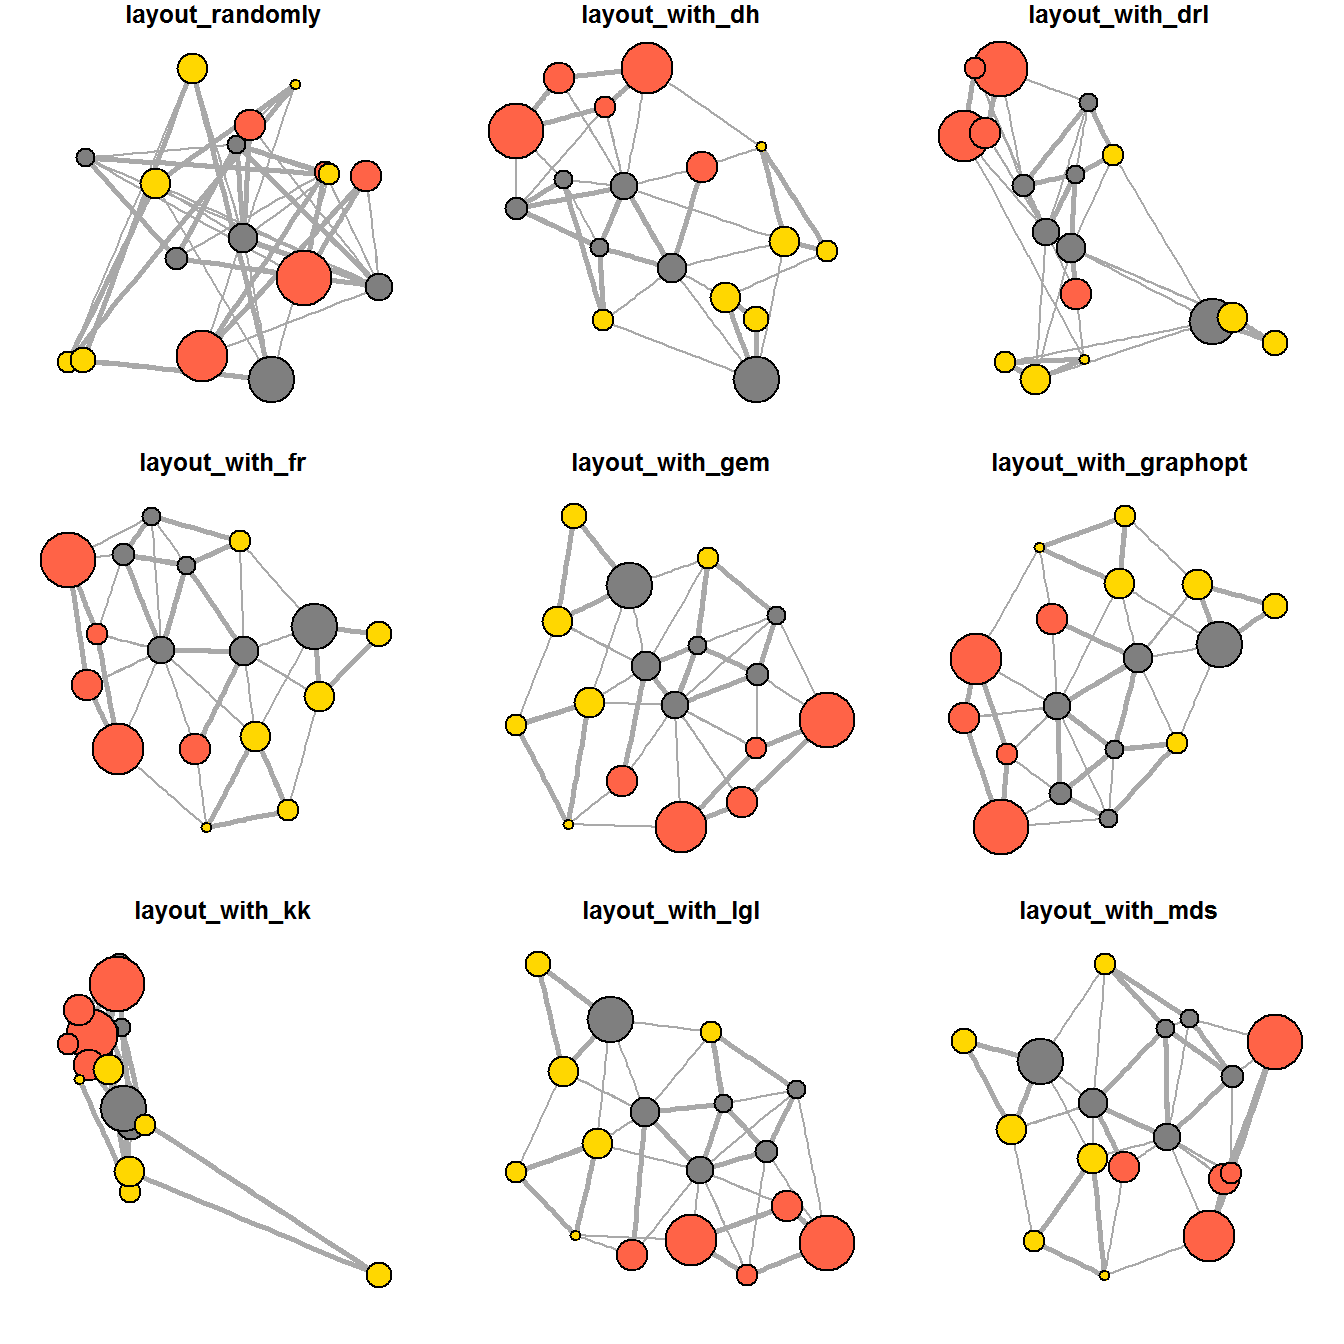 Network visualization with R